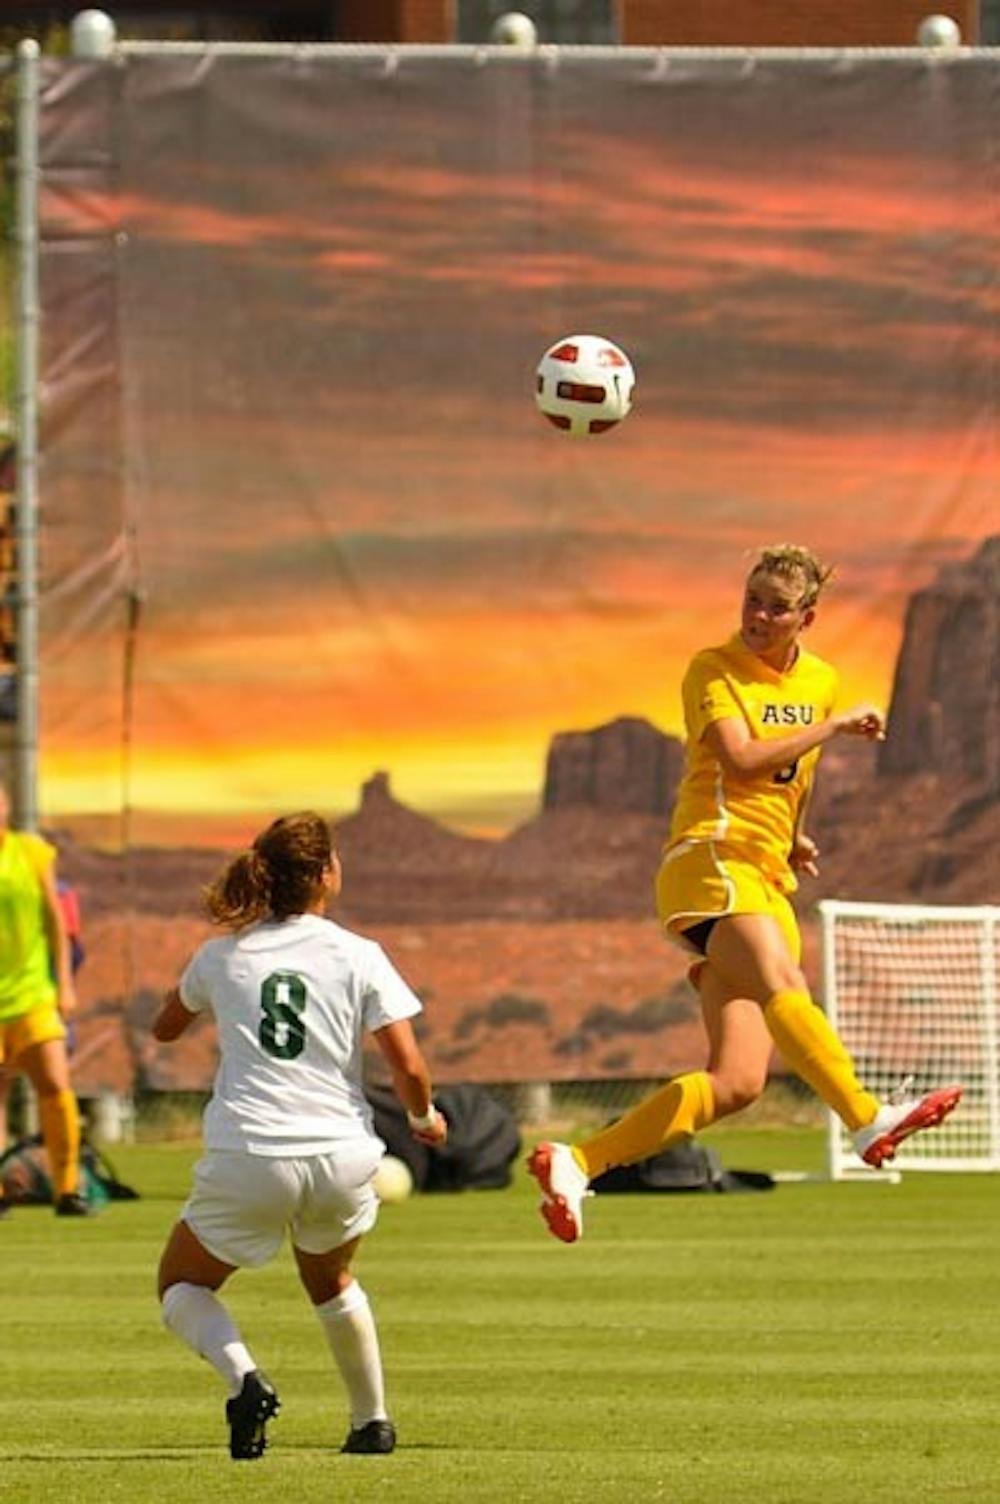 HEAD GAME: Freshman forward Devin Marshall finishes a header in a recent game against Baylor. The 3-0-1 women's soccer team plays two games and hosts the Sun Devils Classic this weekend. (Photo by Aaron Lavinsky)